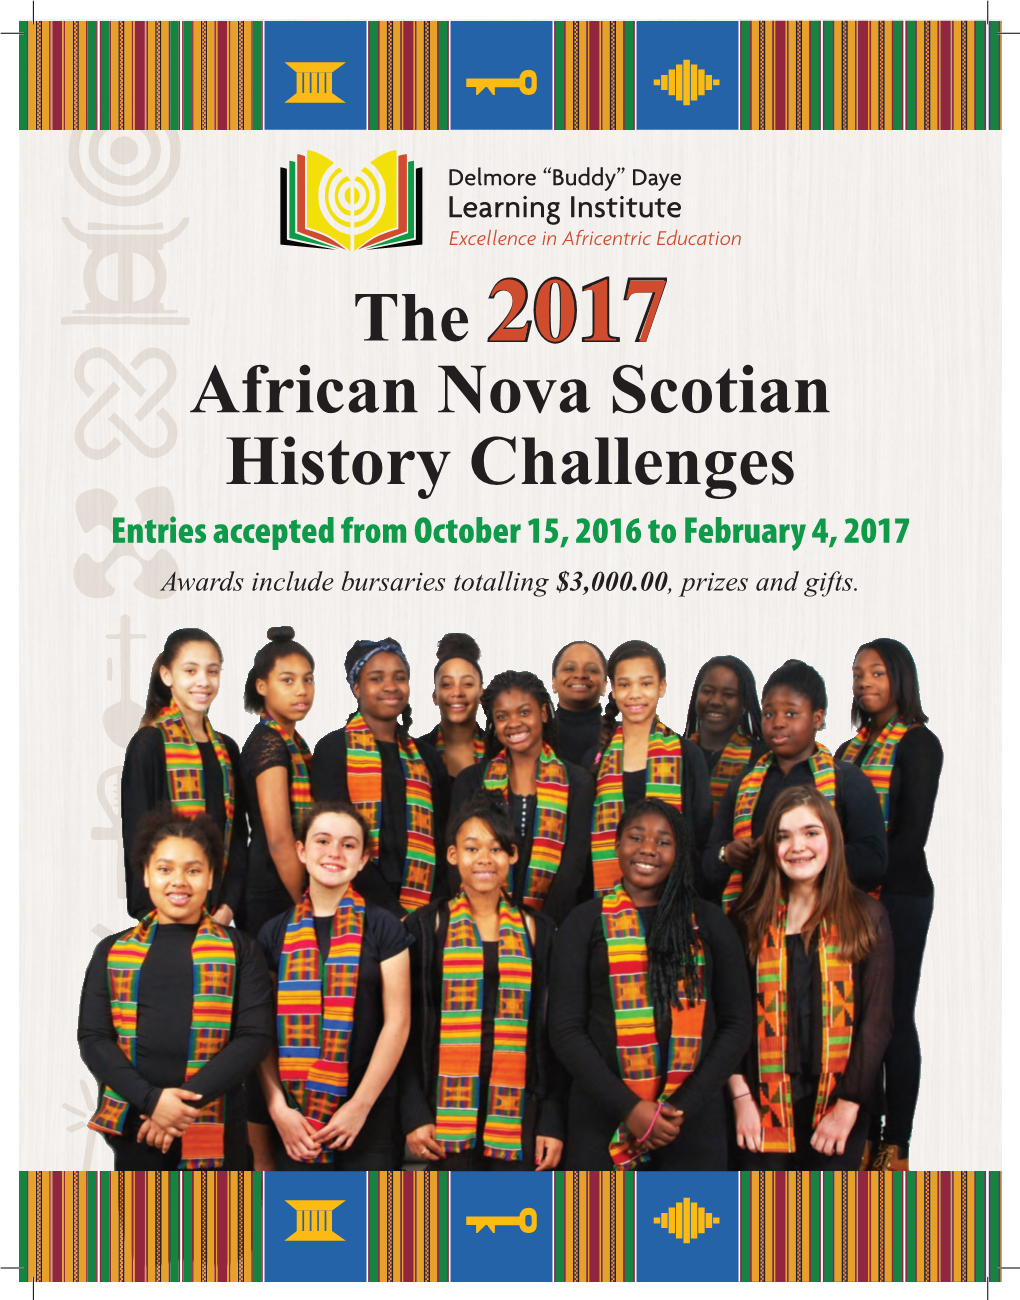 The 2017 African Nova Scotian History Challenges